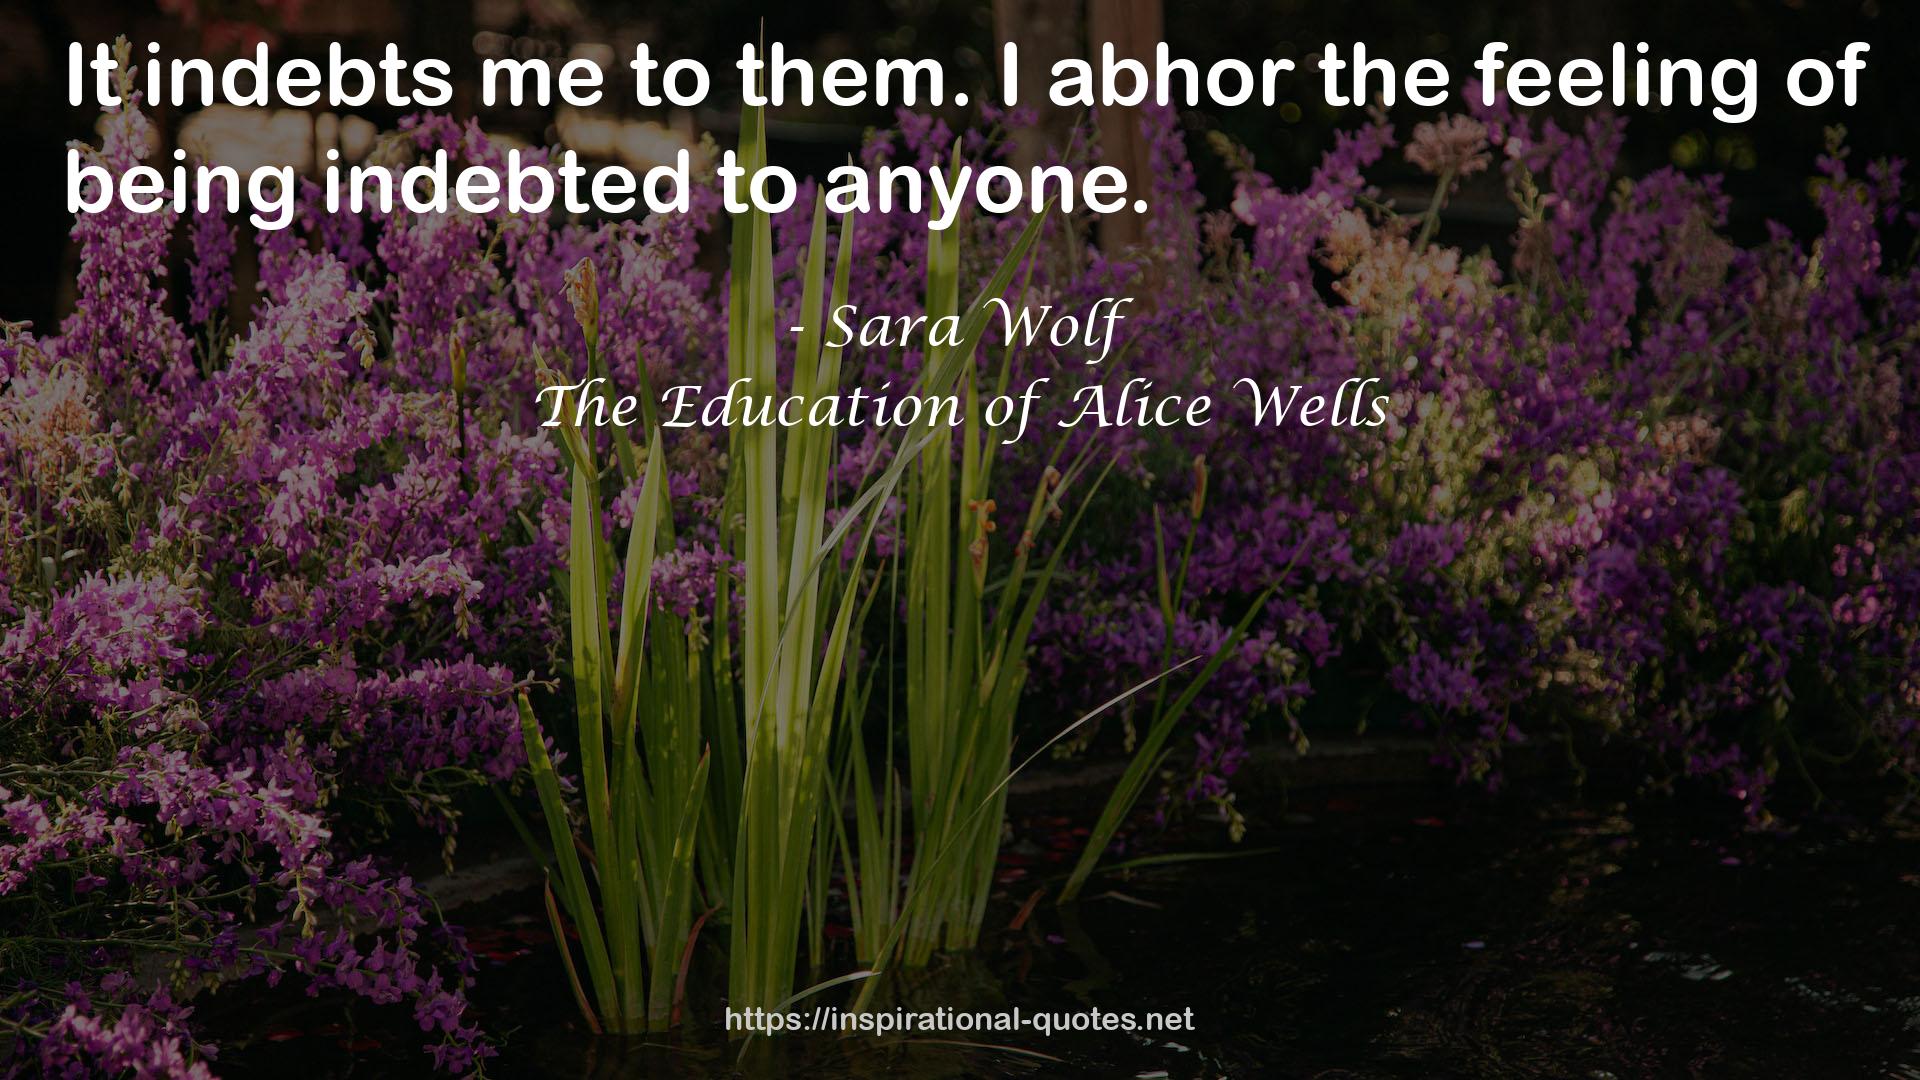 The Education of Alice Wells QUOTES